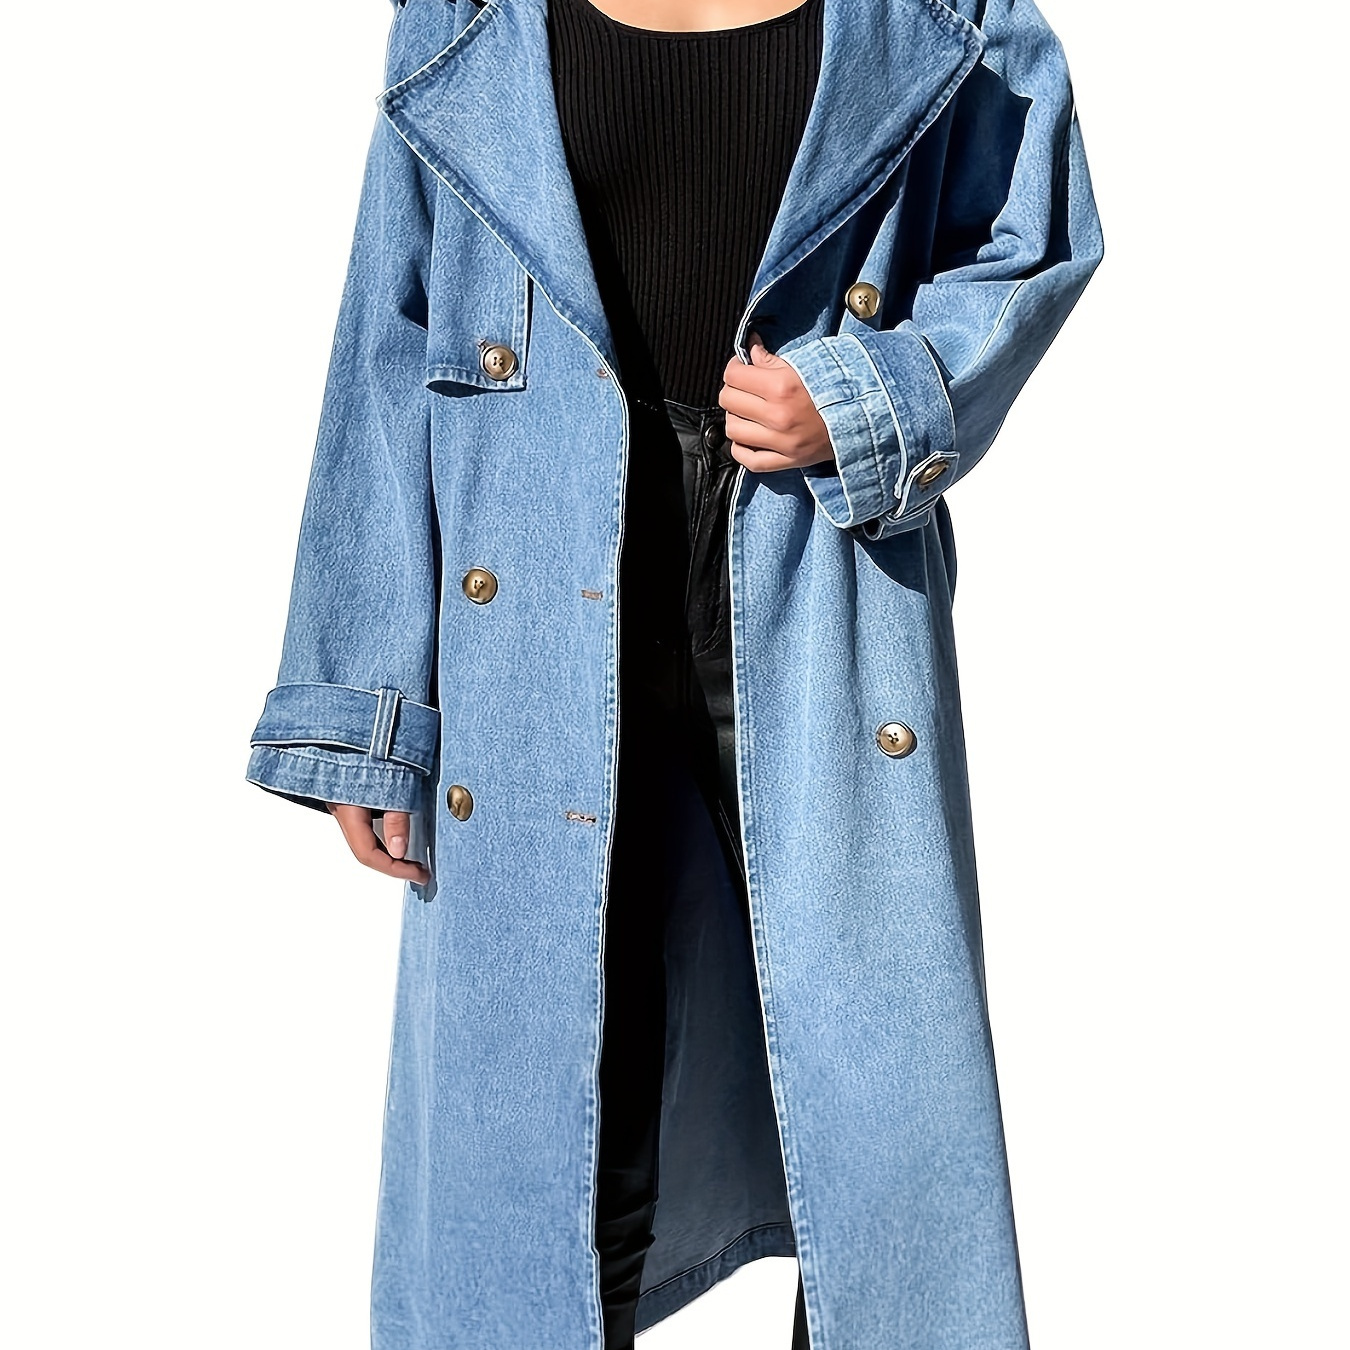 

Women's Long Denim Trench Coat, Vintage Style With Belt, Casual Jean Jacket For Outdoor And Daily Wear